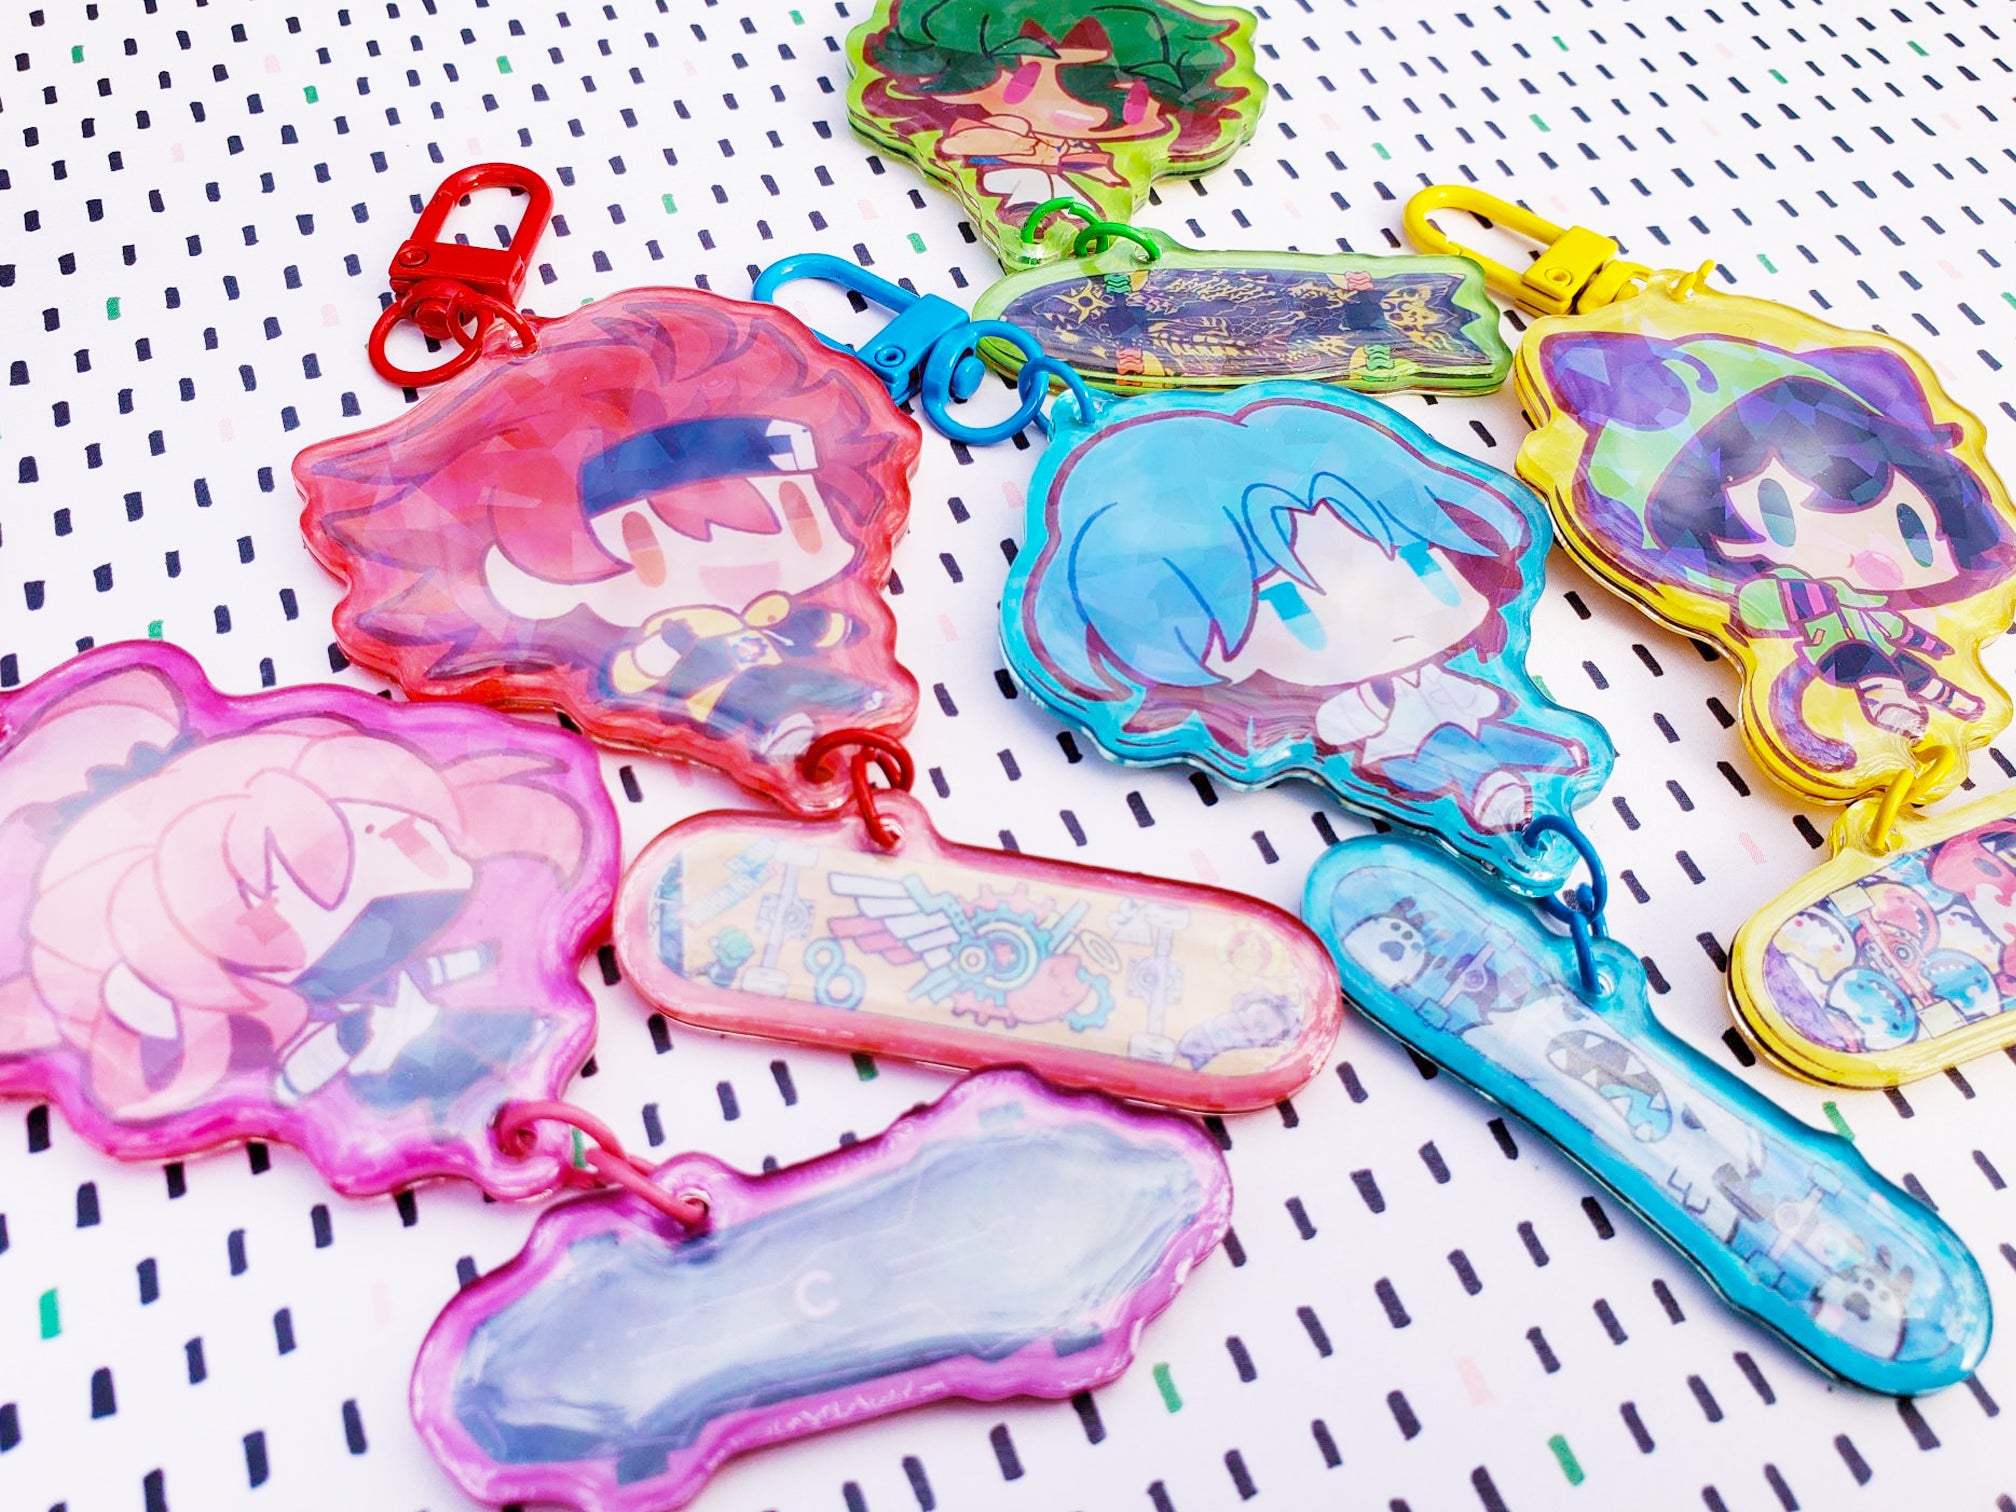 SK8 the Infinity: Cute Skater Hologram Colorful Keychains w/ Skateboards Attached